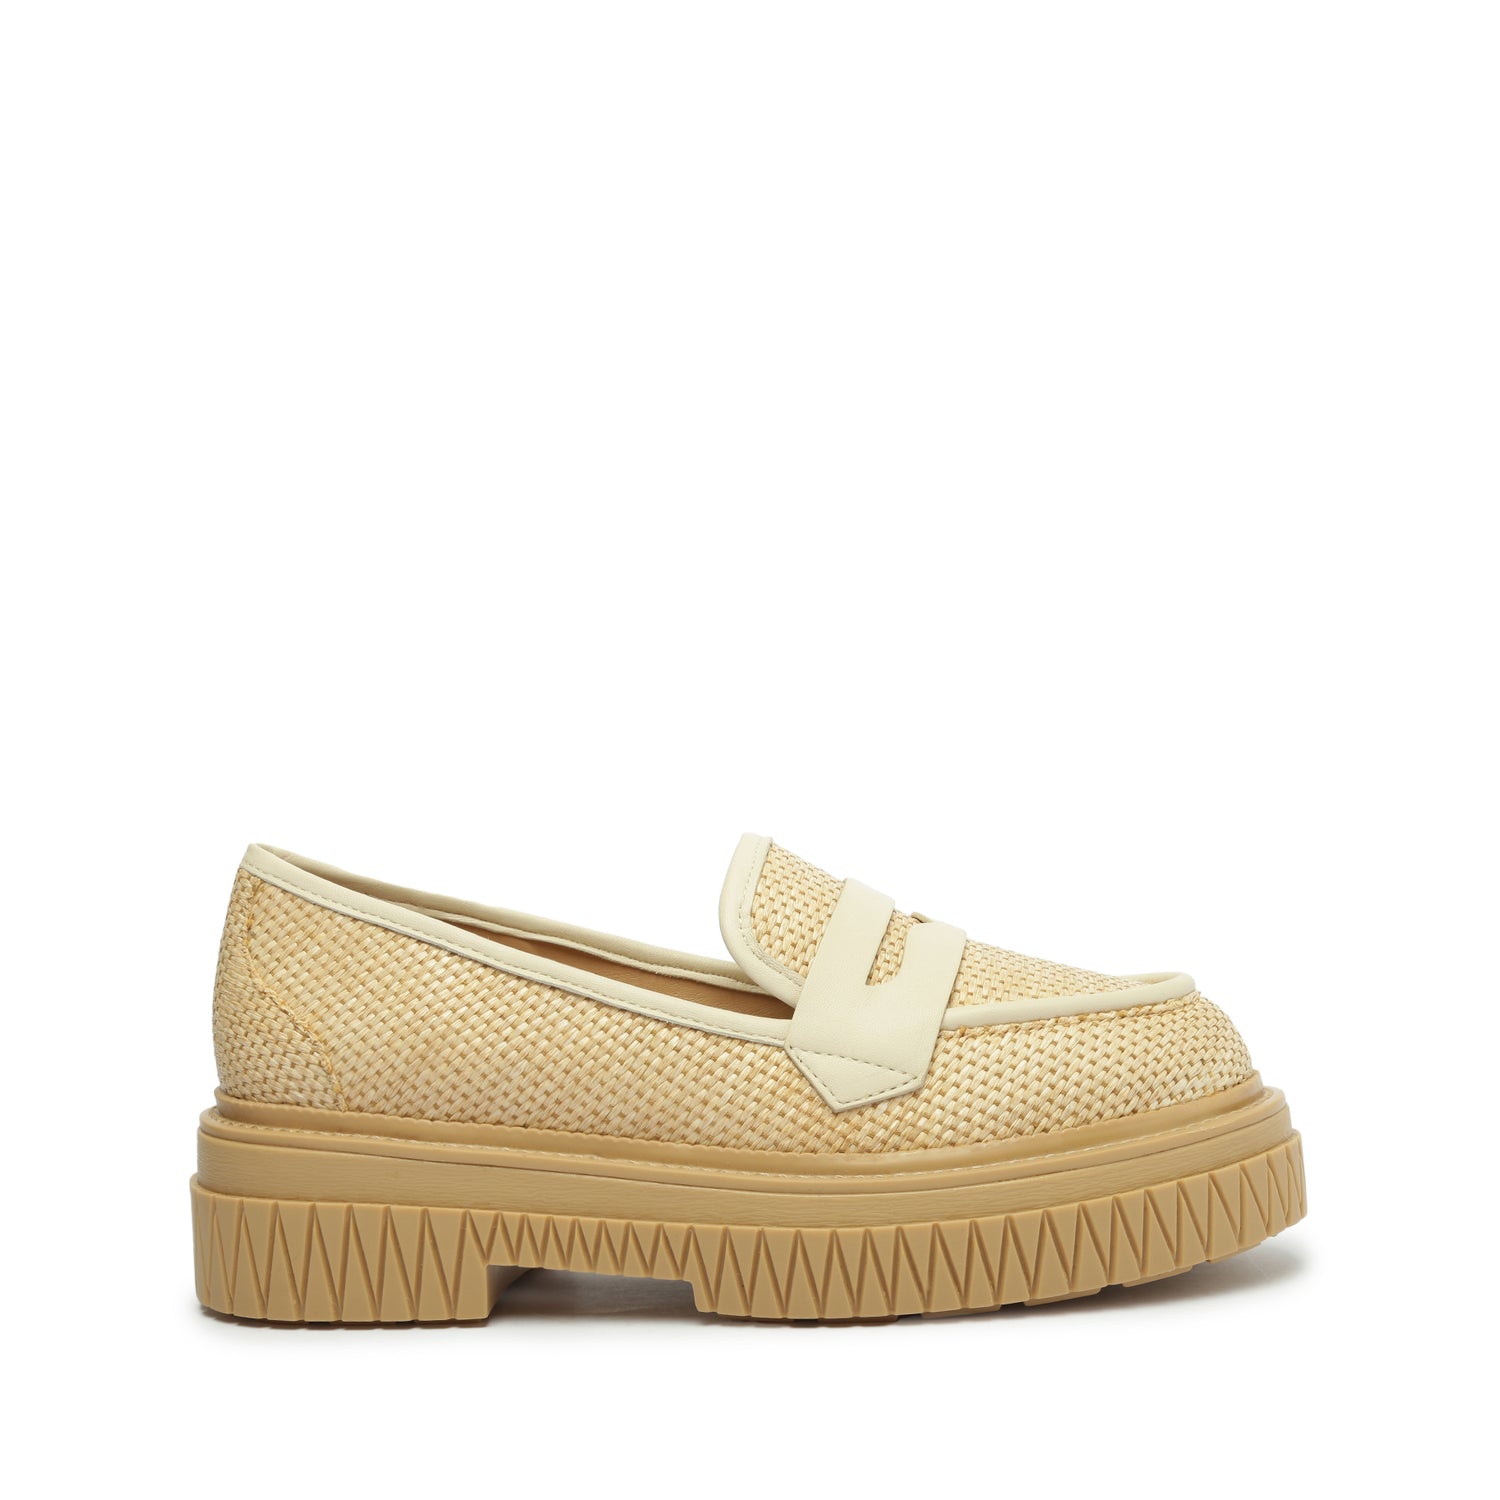 Viola Weekend Nappa Leather Flat Flats Spring 23 5 Off White Nappa Leather - Schutz Shoes